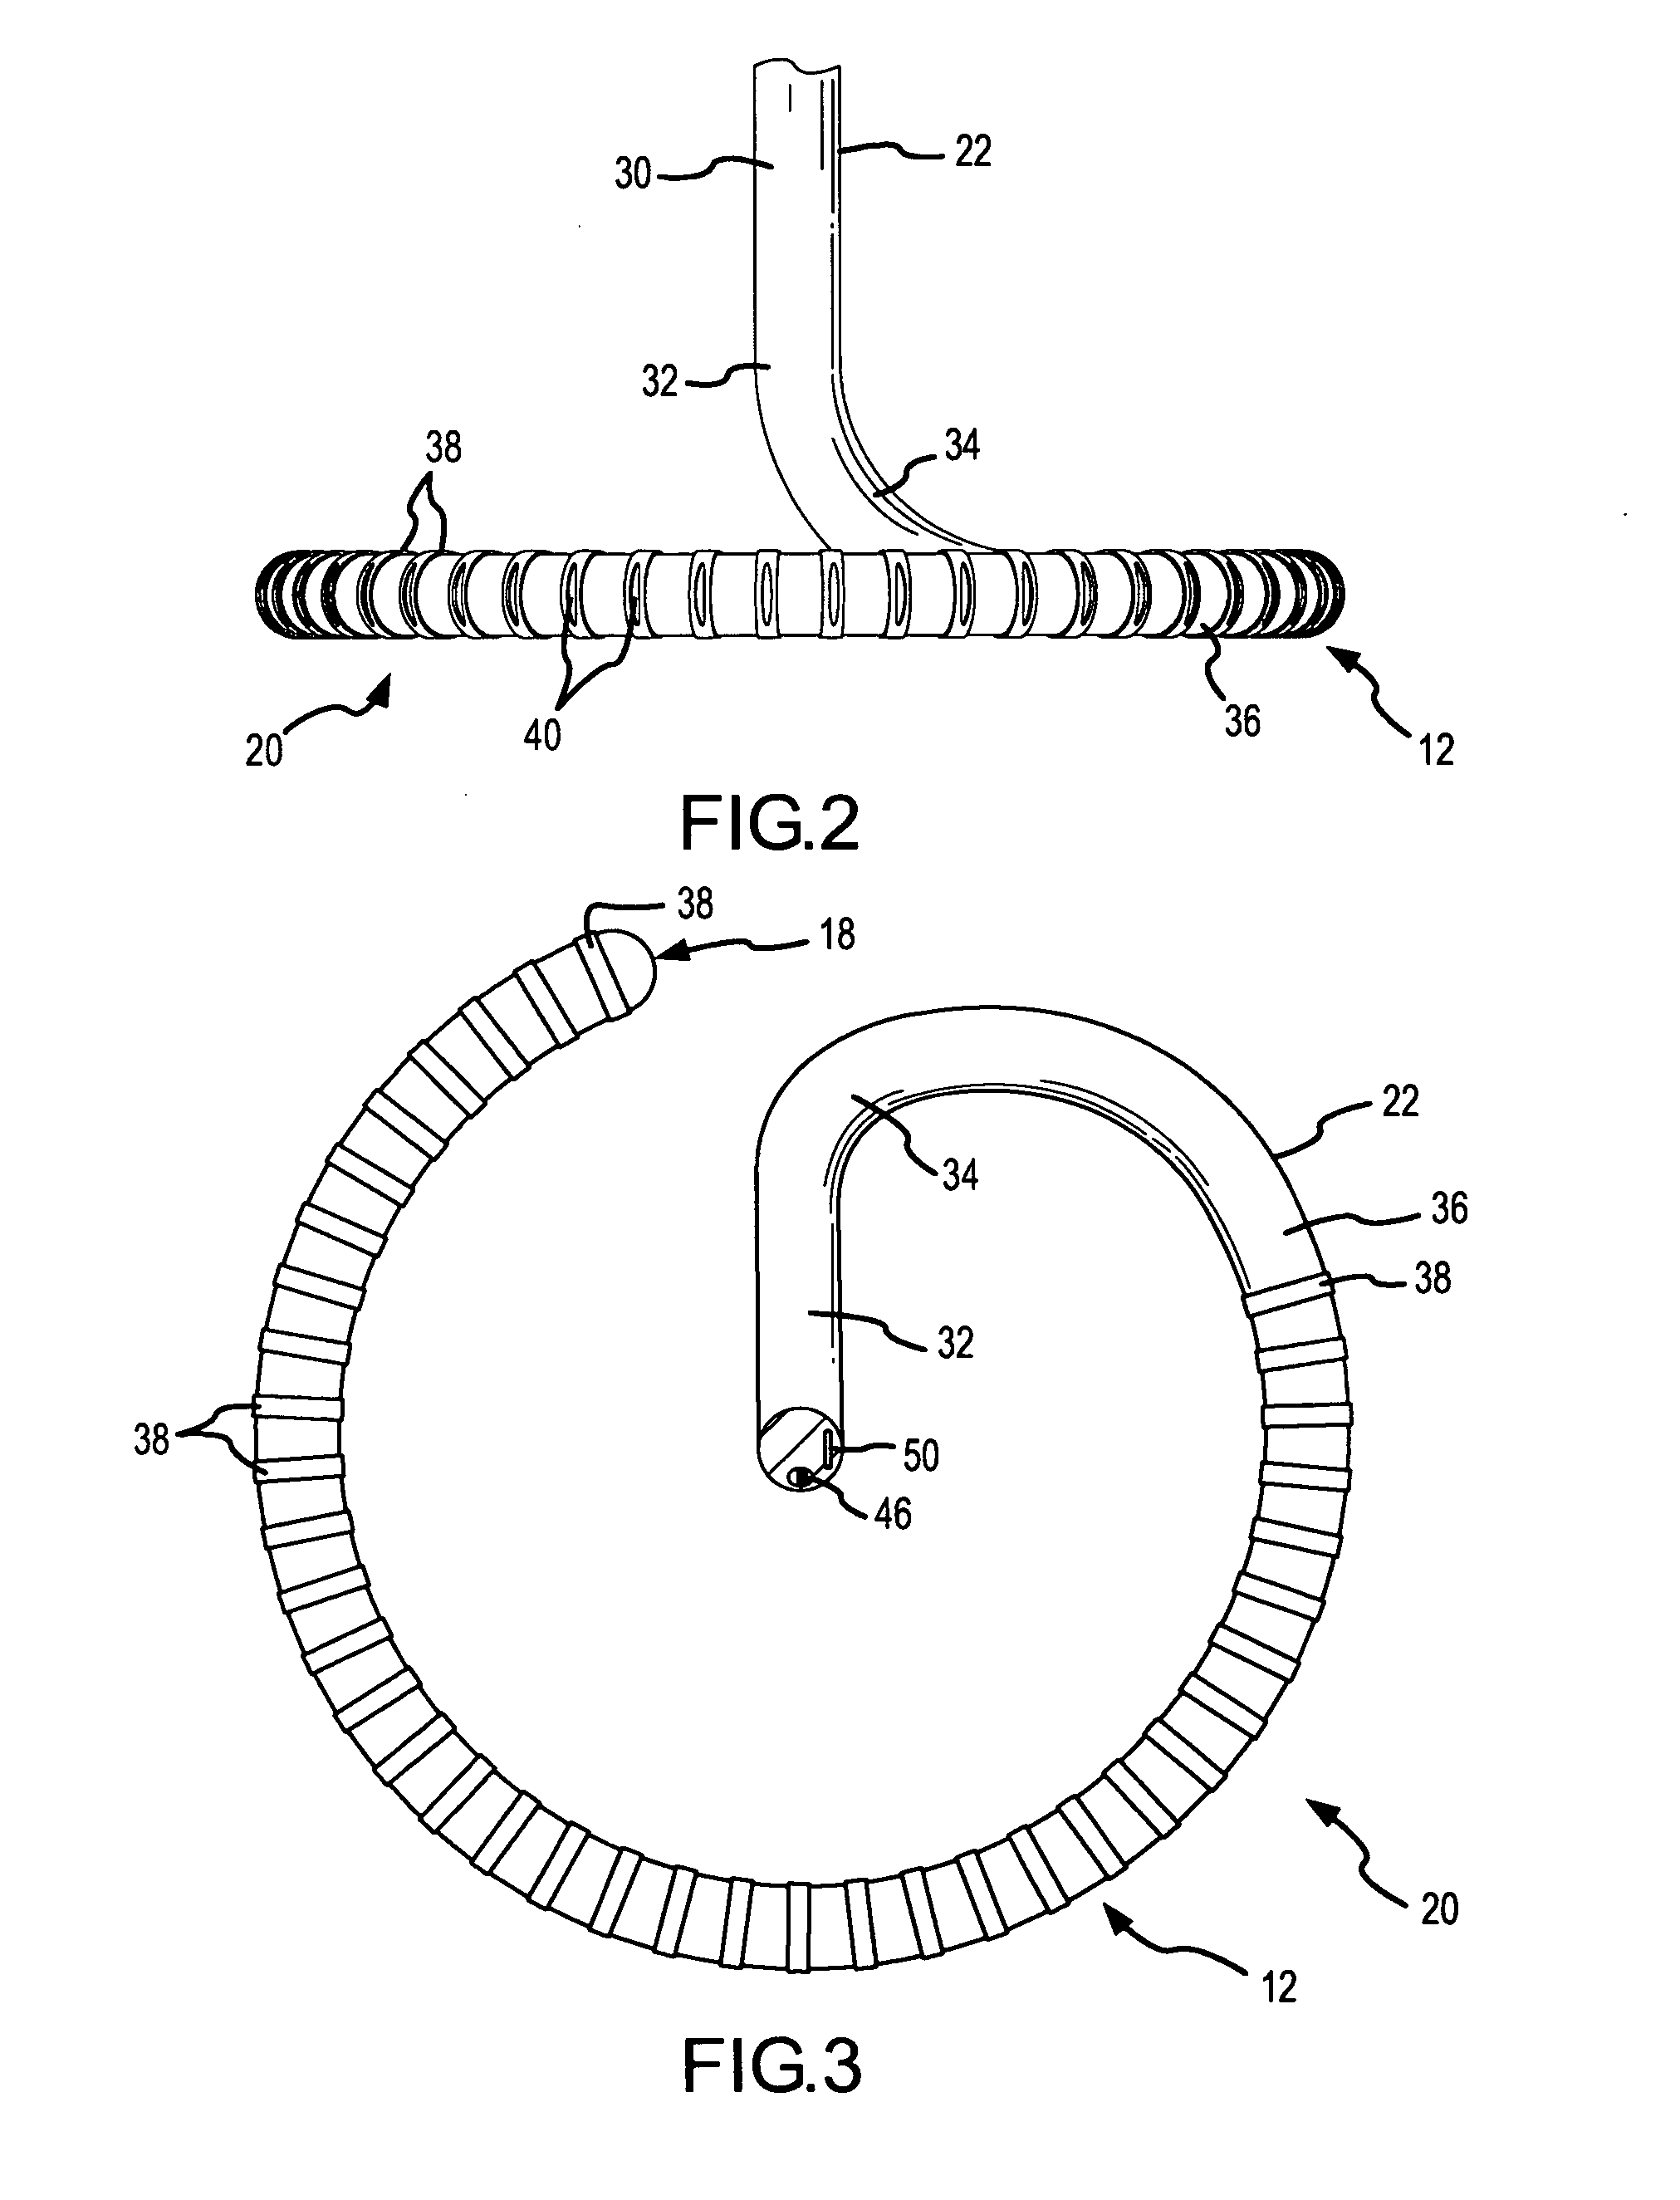 Ablation catheter with contoured openings in insulated electrodes